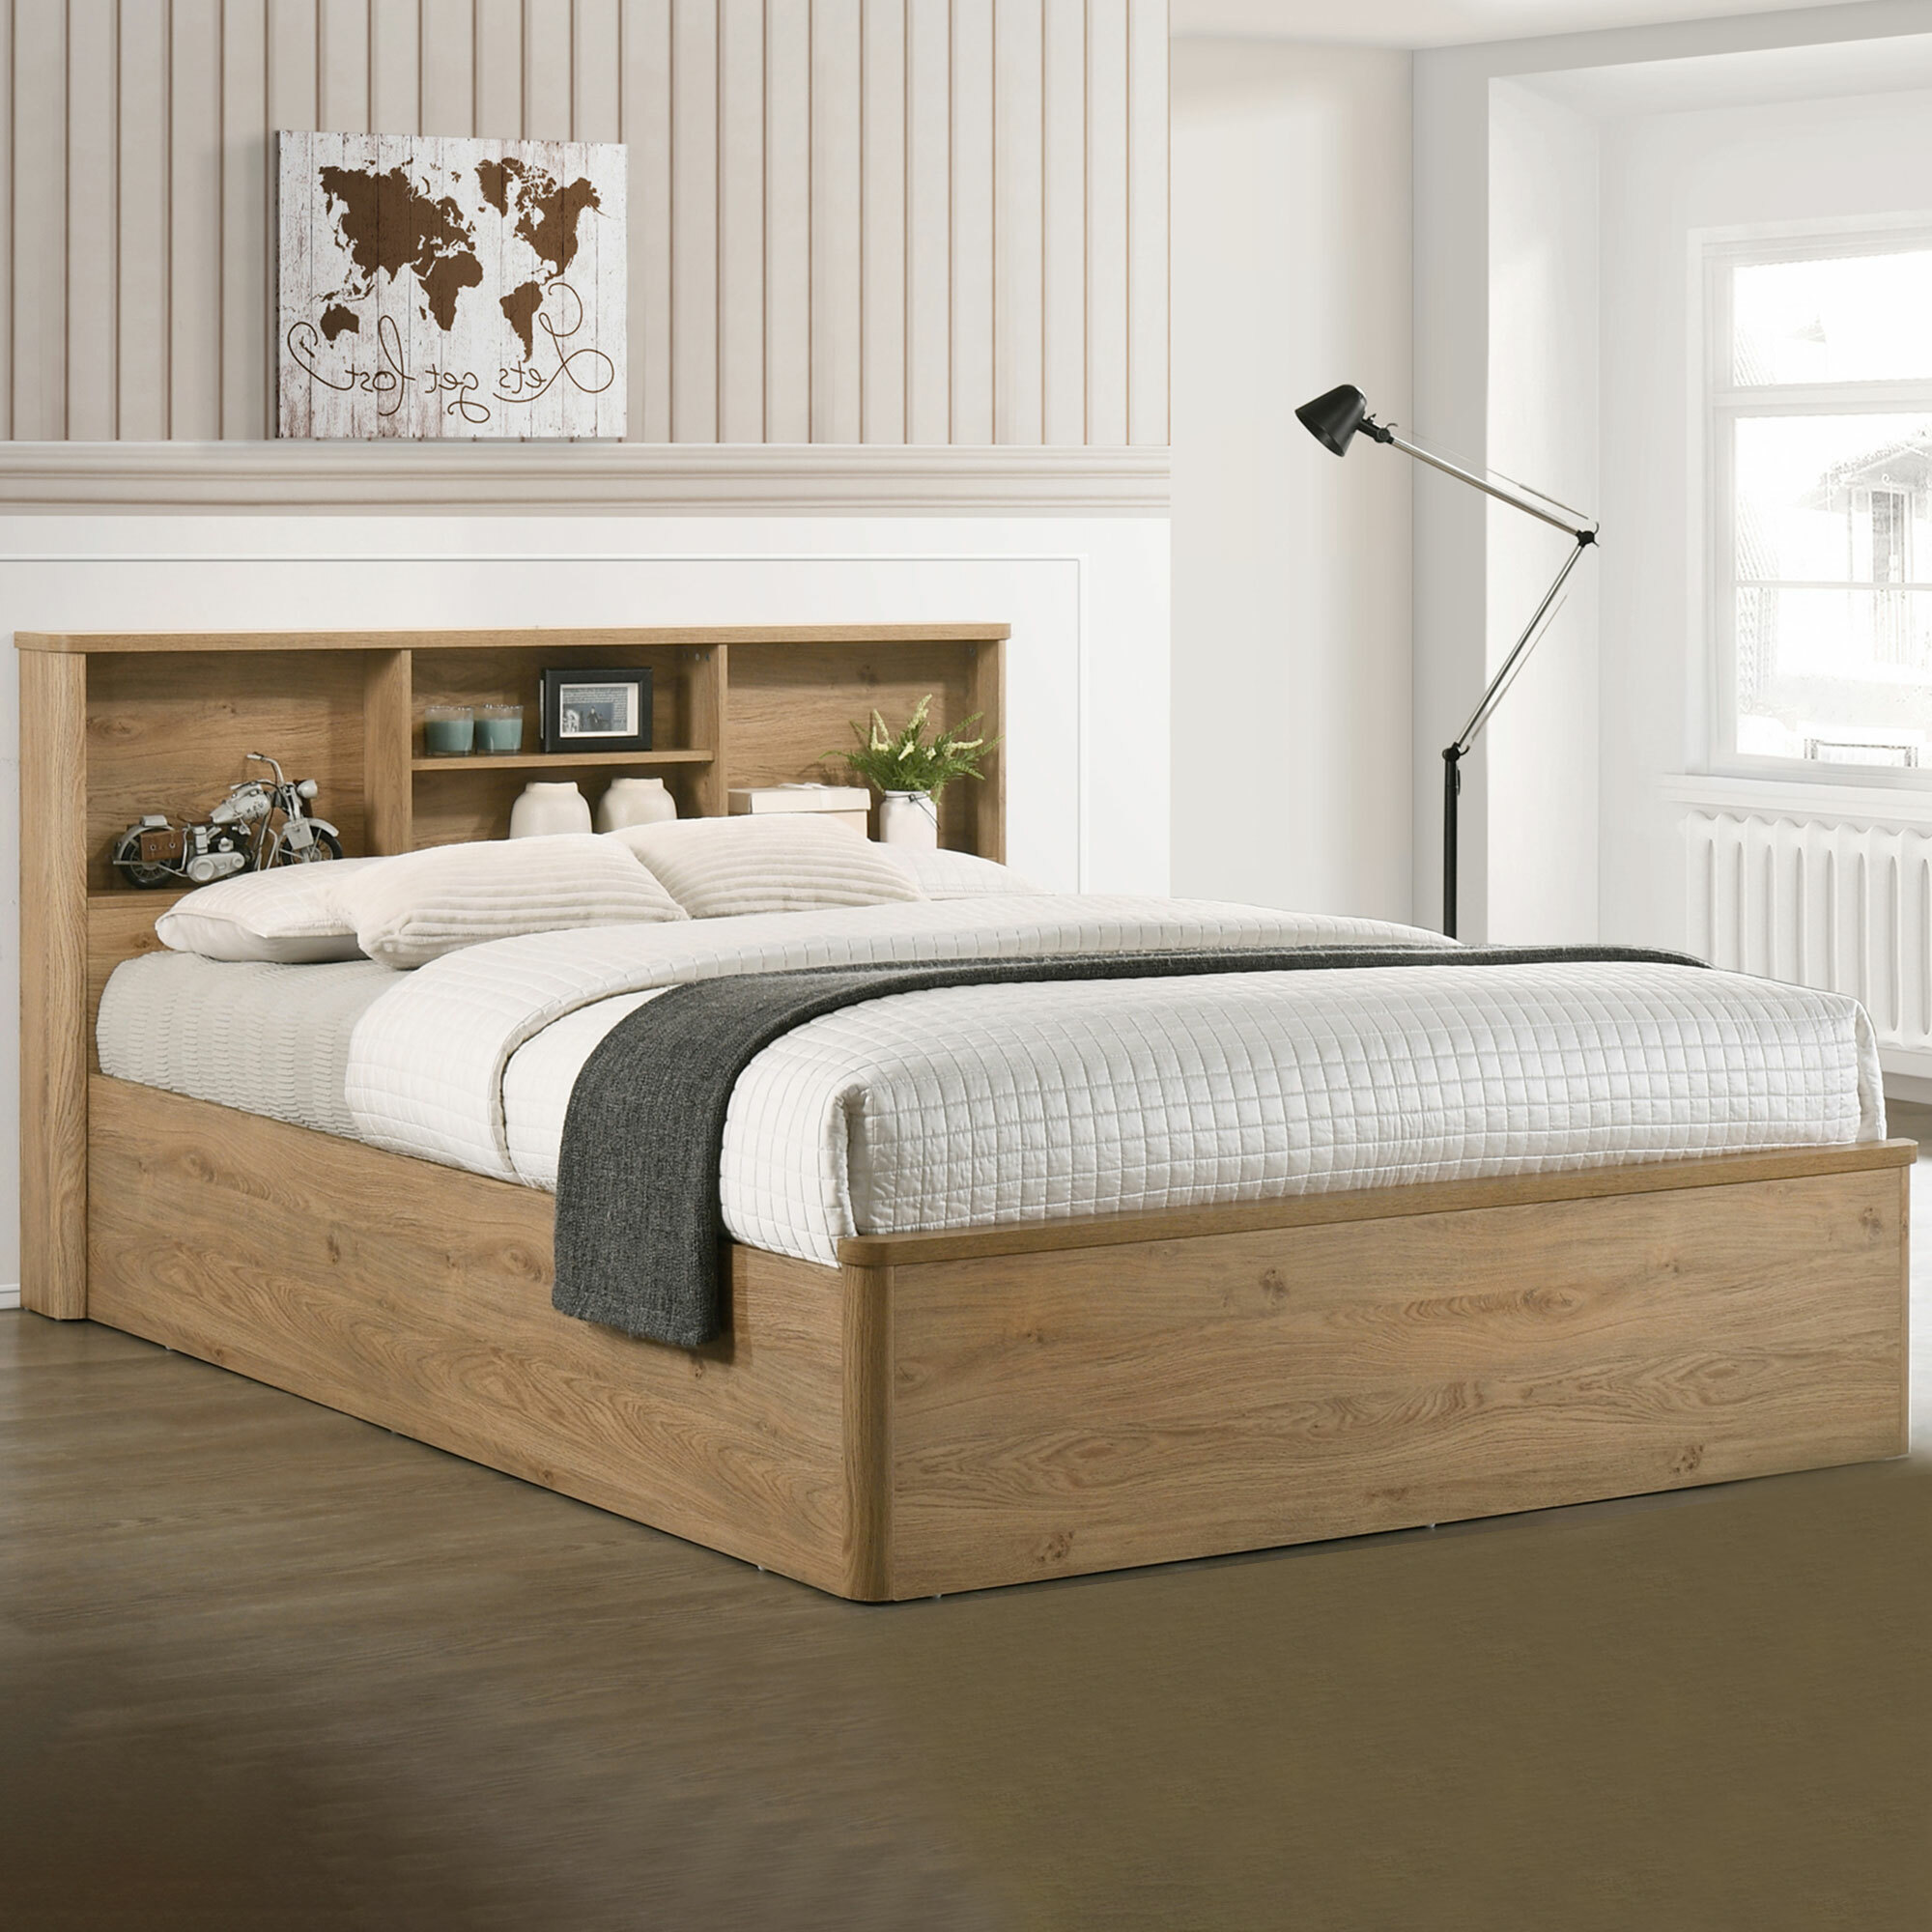 Core Living Natural Anderson Queen Bed, Bookcase Headboard Decorating Ideas